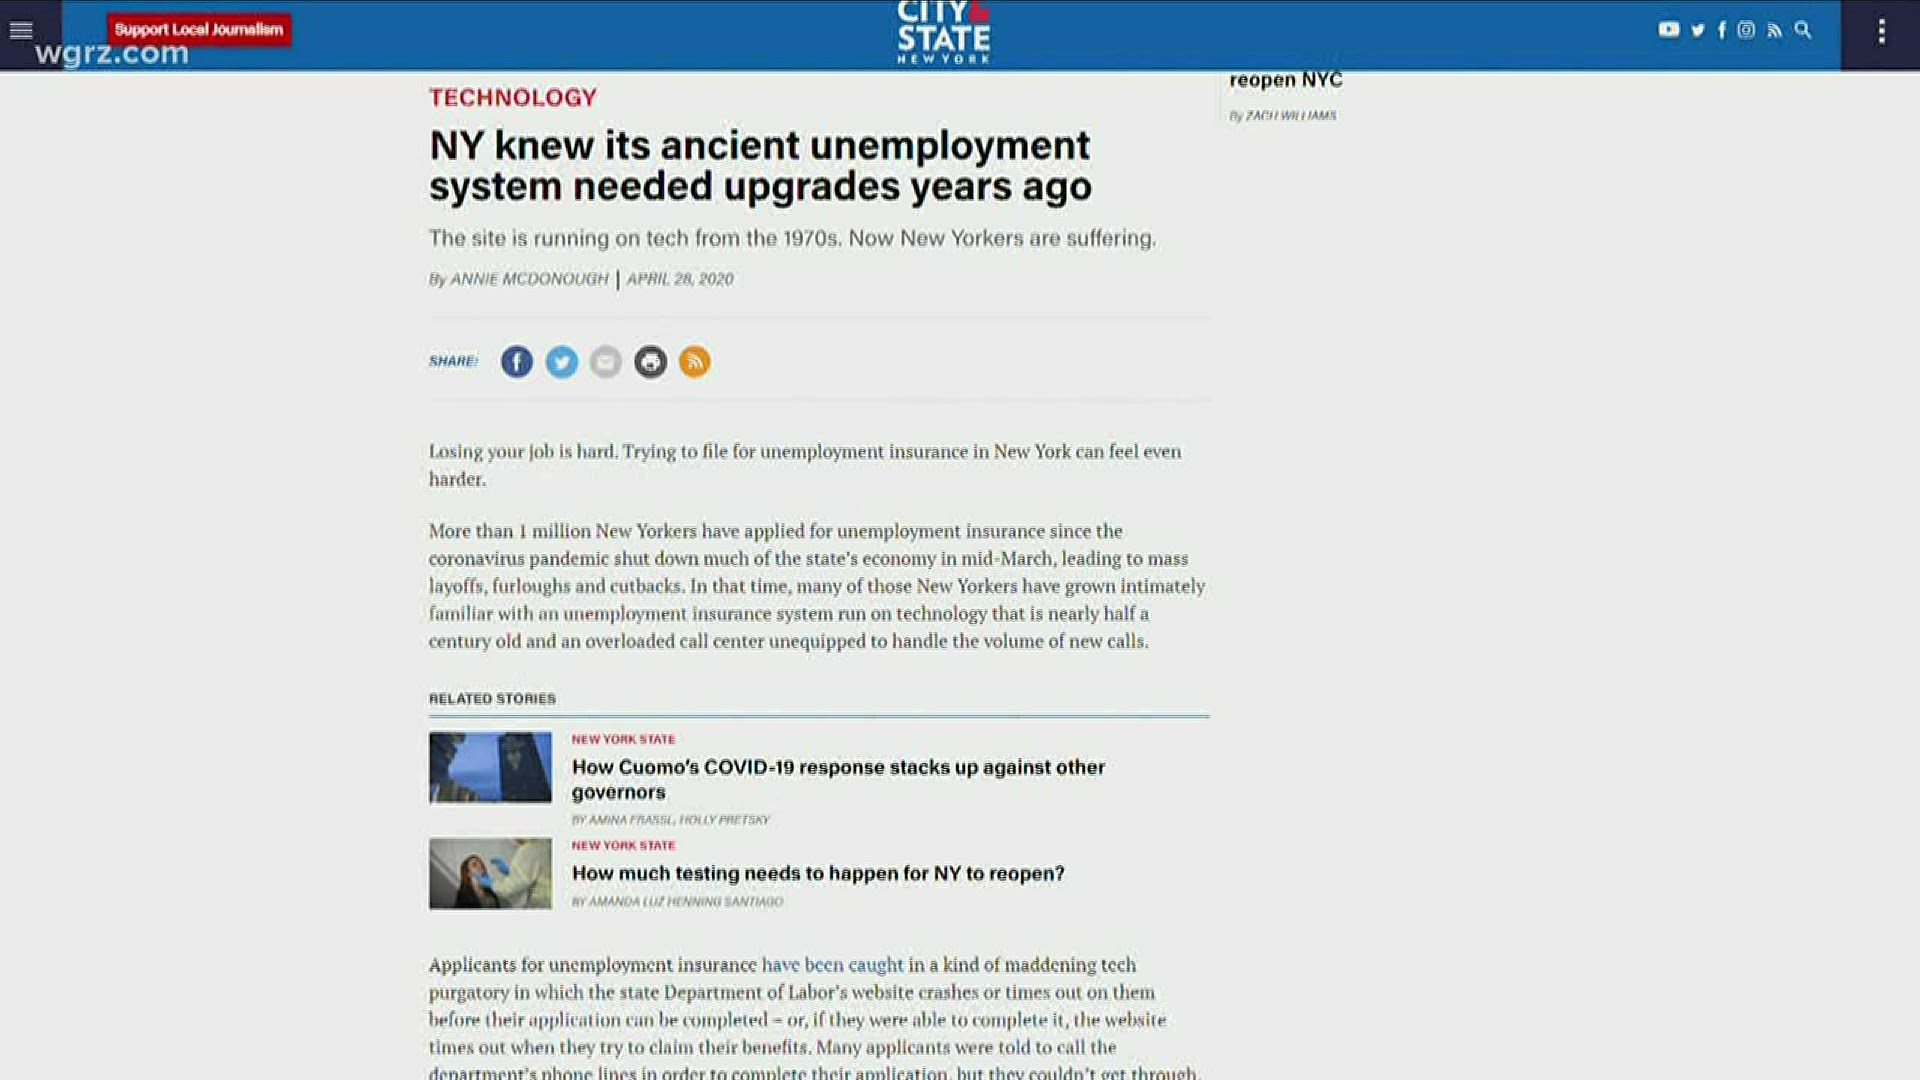 An article shows the state put a request for a proposal to revamp that unemployment website three years ago. Systems behind it were designed as far back as 1970's.